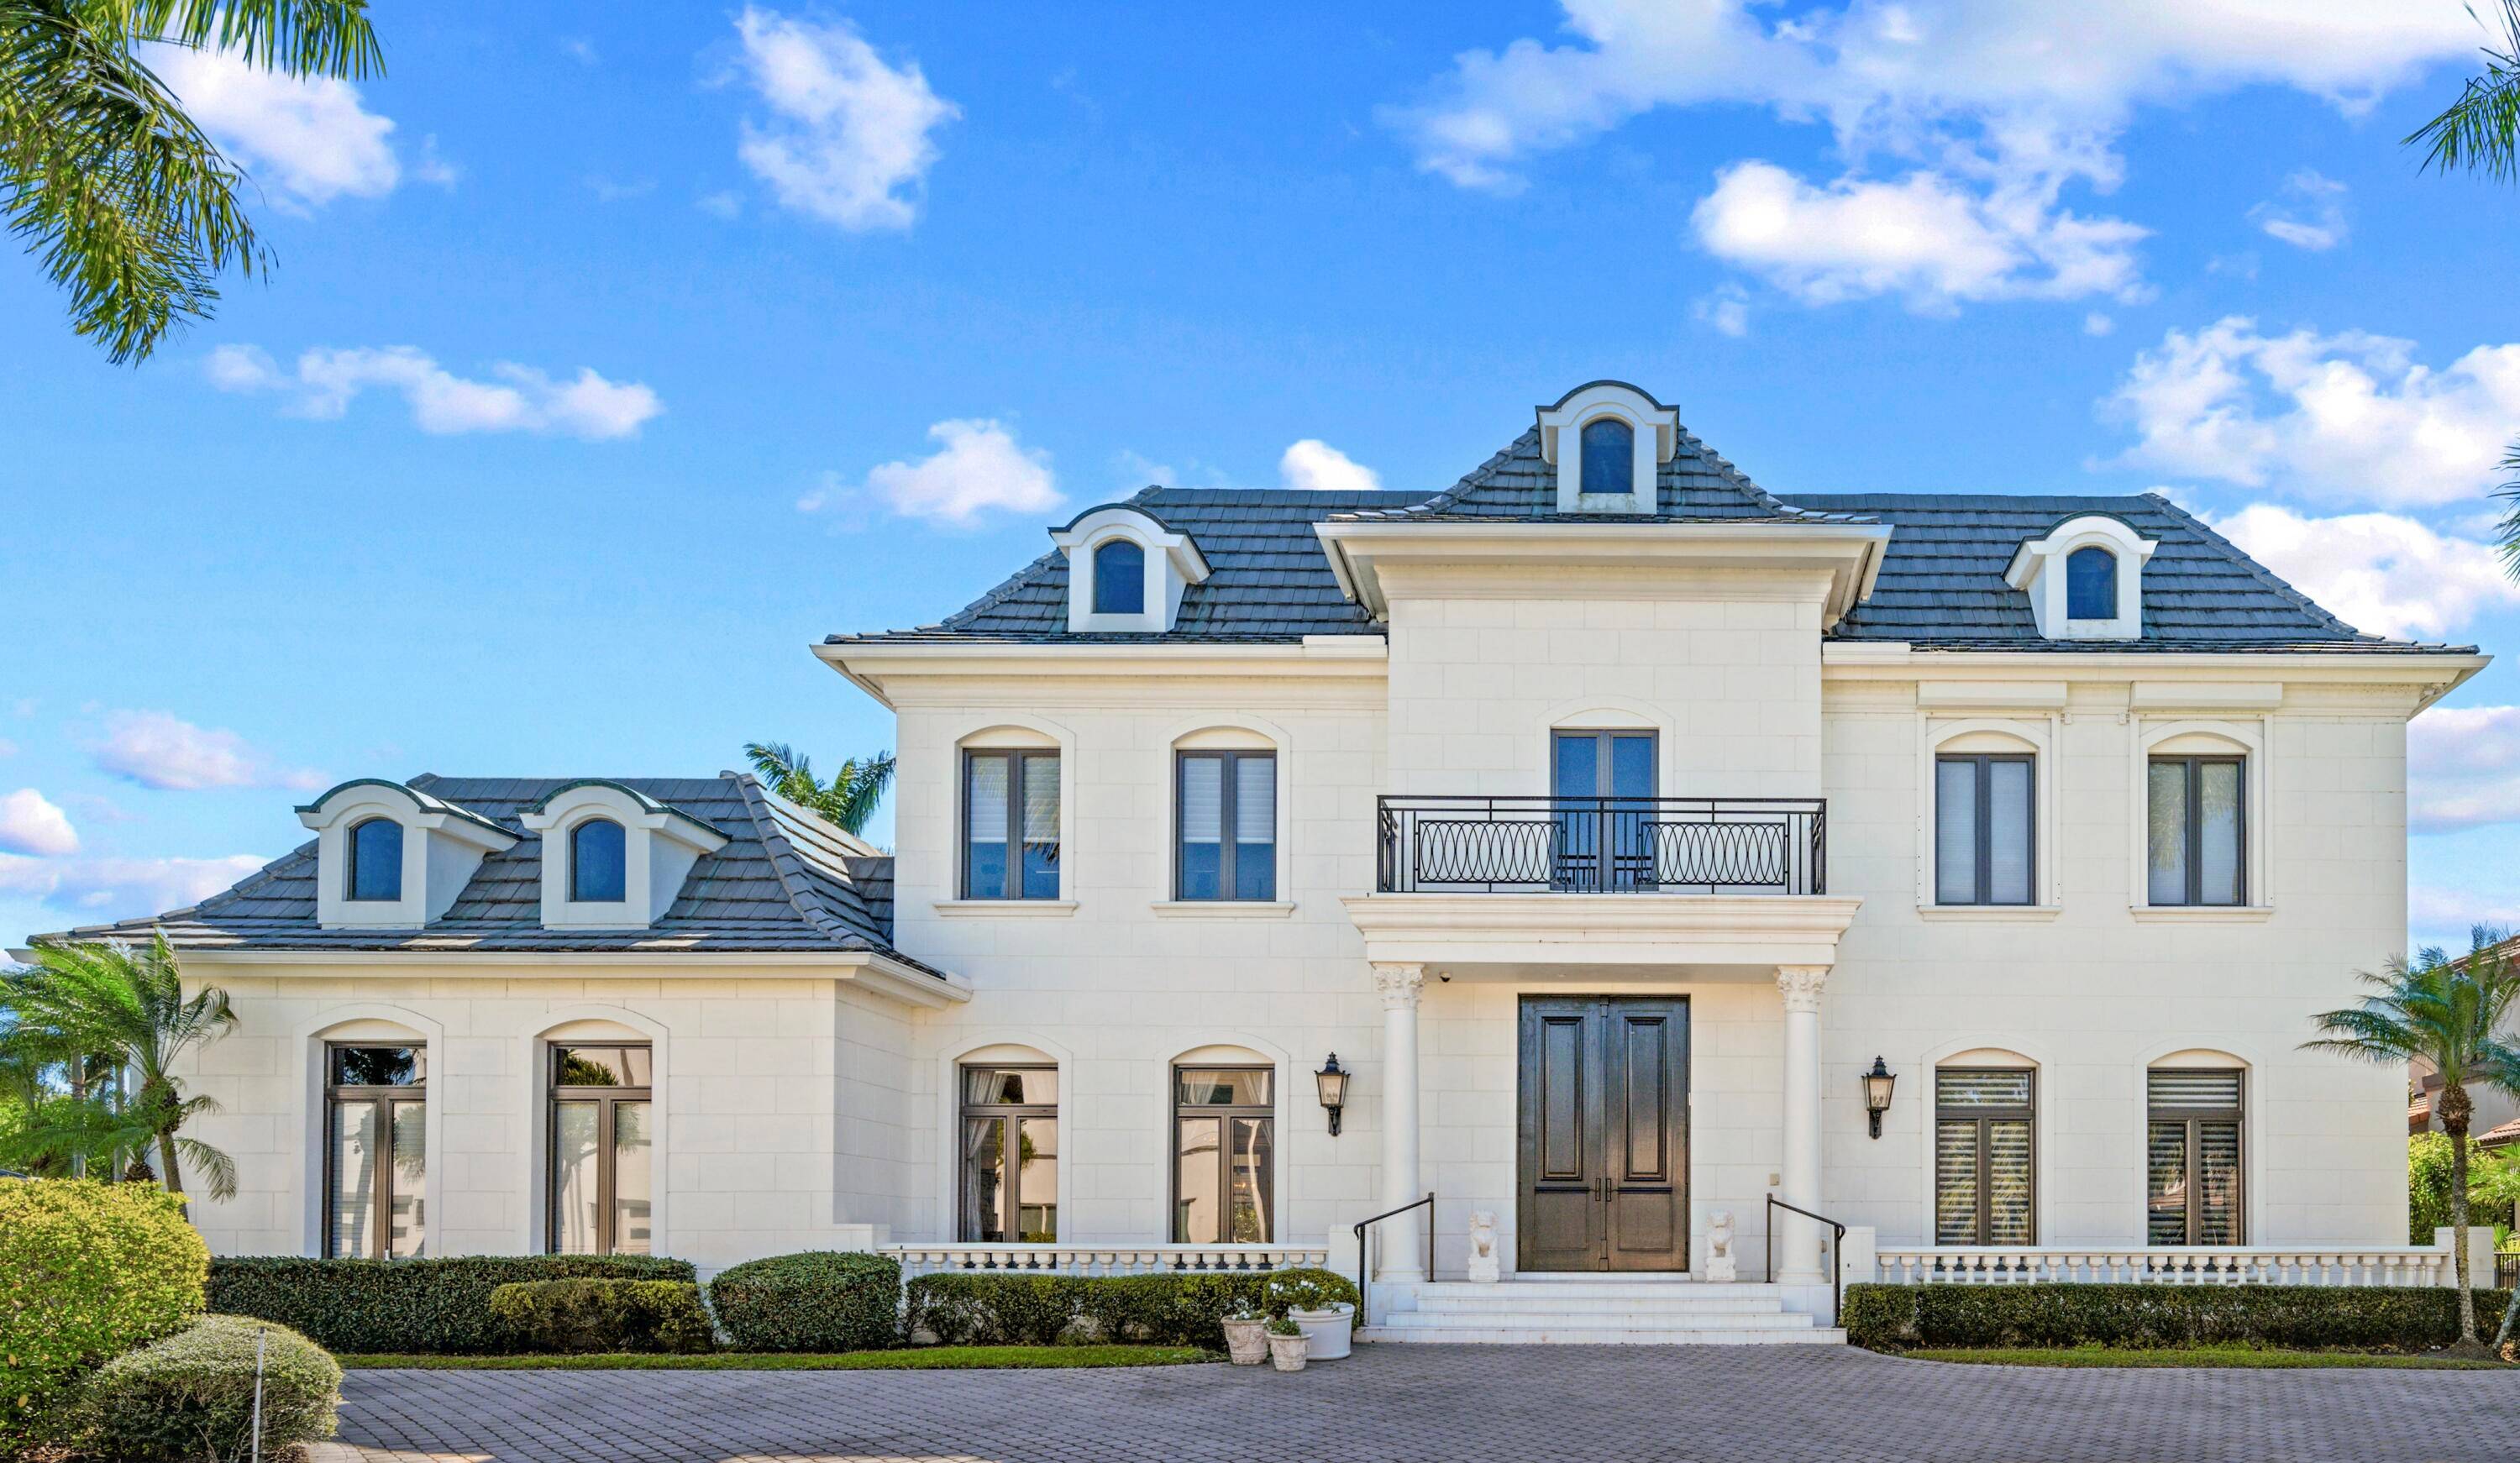 The absolute epitome of luxury living at this exquisite custom home nestled in the heart of Boca Grove Plantation, one of Boca's most exclusive country clubs.